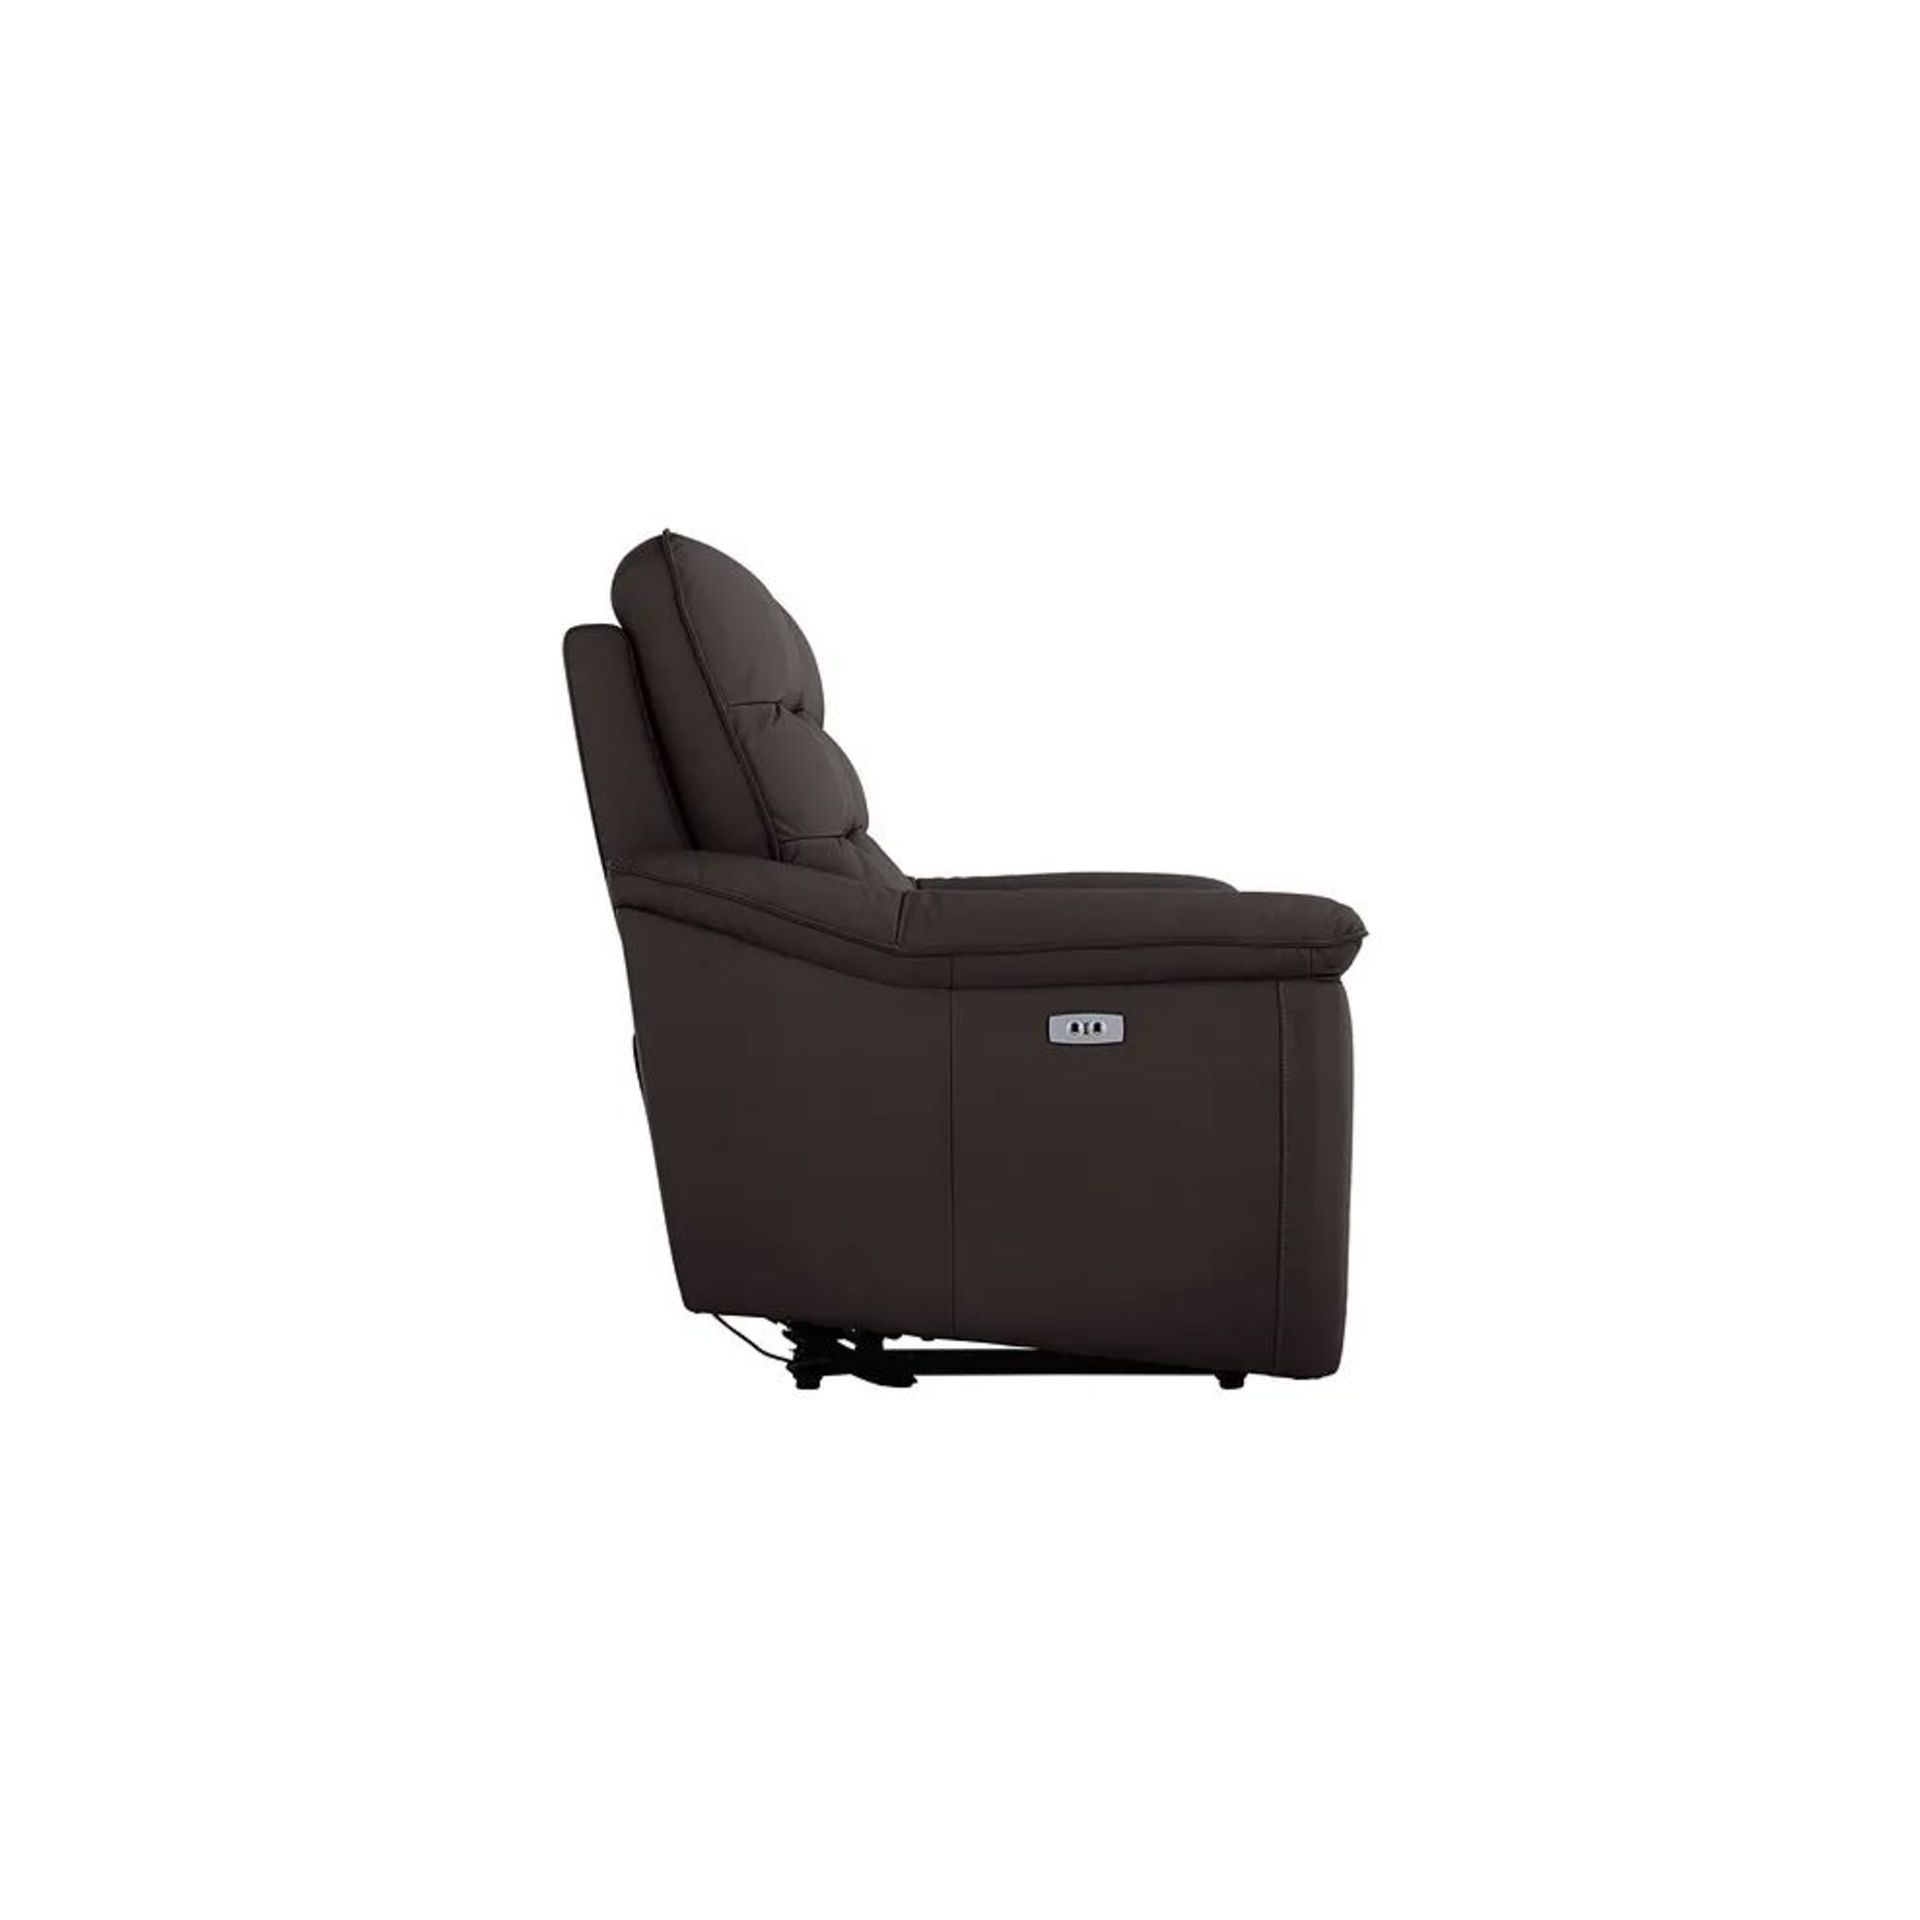 BRAND NEW CARTER 3 Seater Electric Recliner Sofa - BROWN LEATHER. RRP £1699. Showcasing classic - Bild 7 aus 11